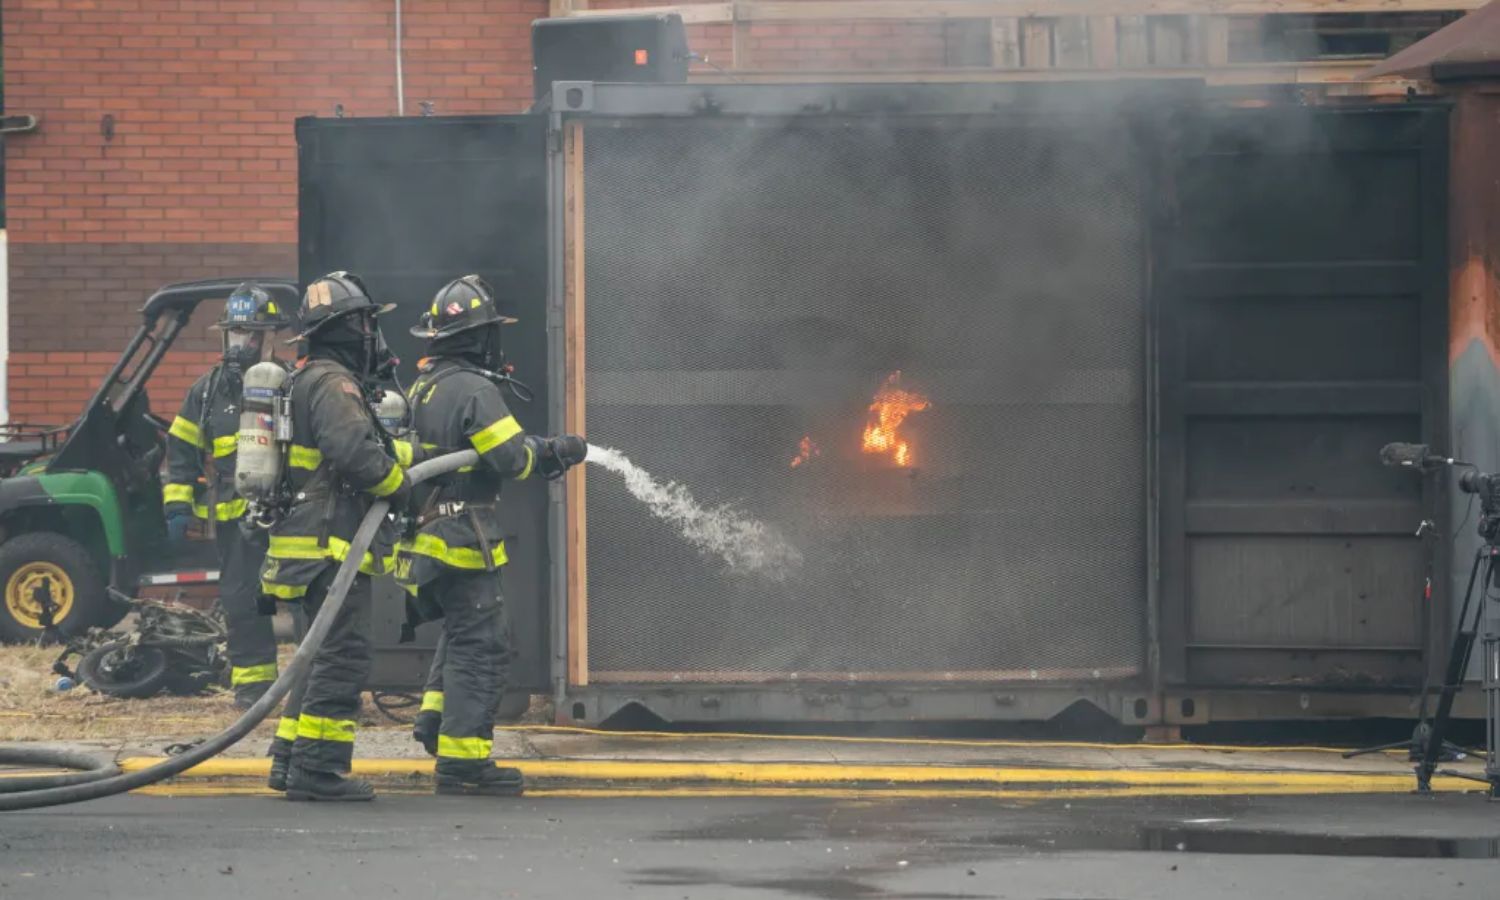 Firefighter Response and Sprinklers